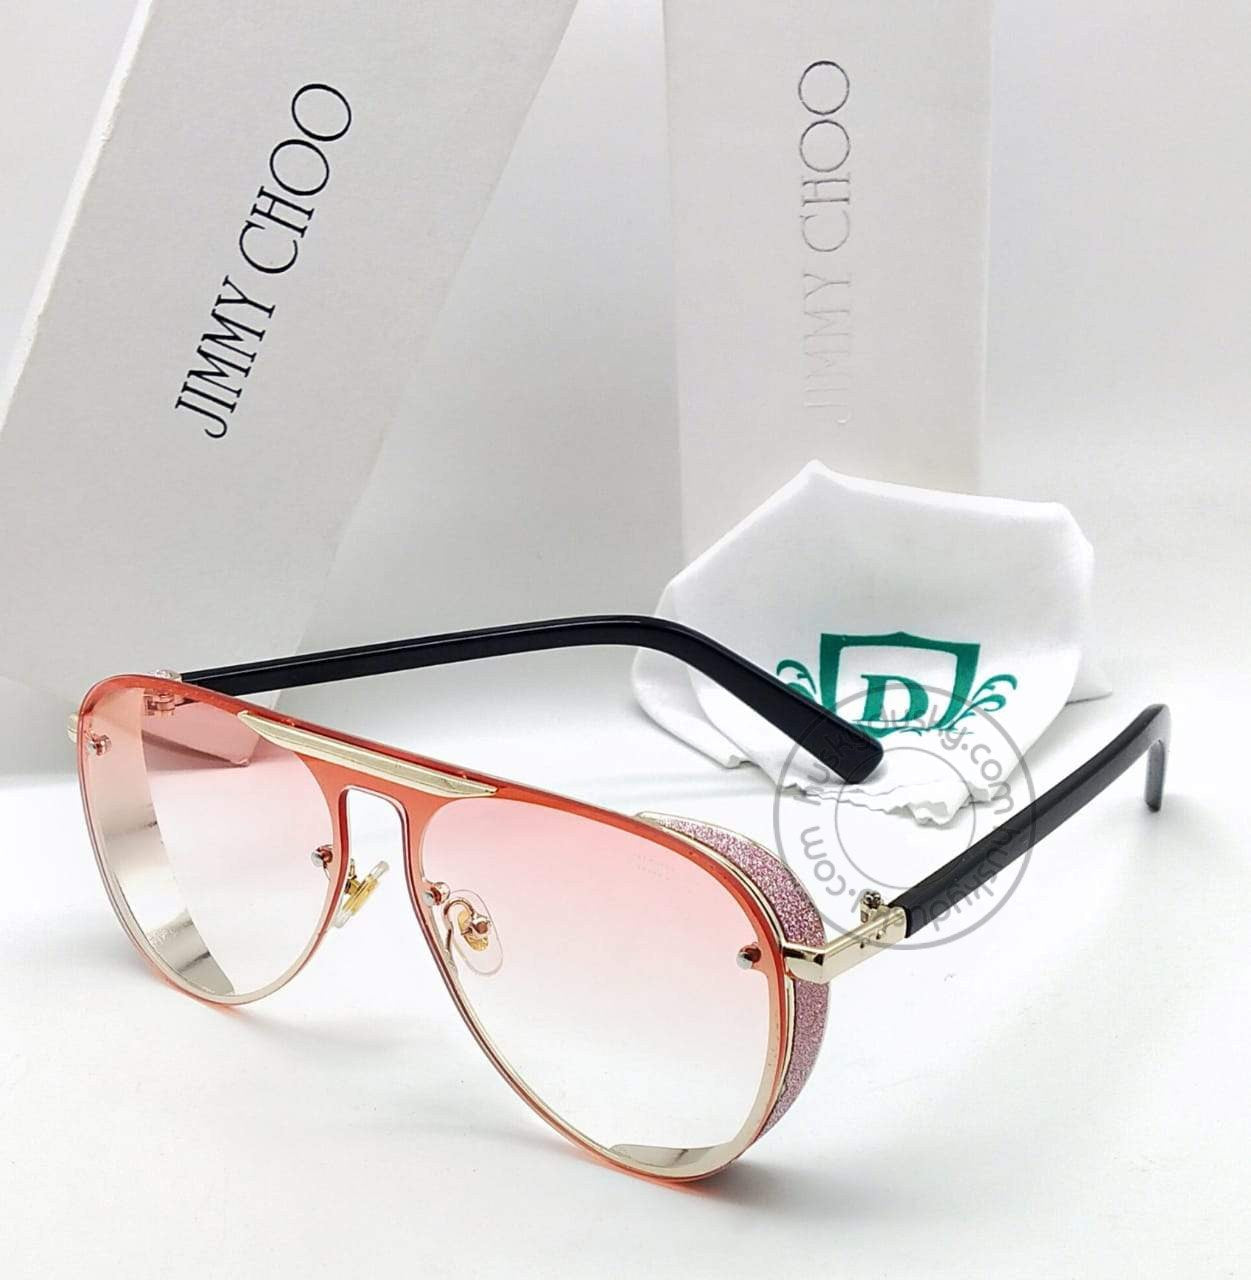 Jimmy Choo Branded Multi Color Double Shade Red&Pink Glass Women's Sunglass For Woman or Girl JC-322 Black Stick Frame Gift Sunglass